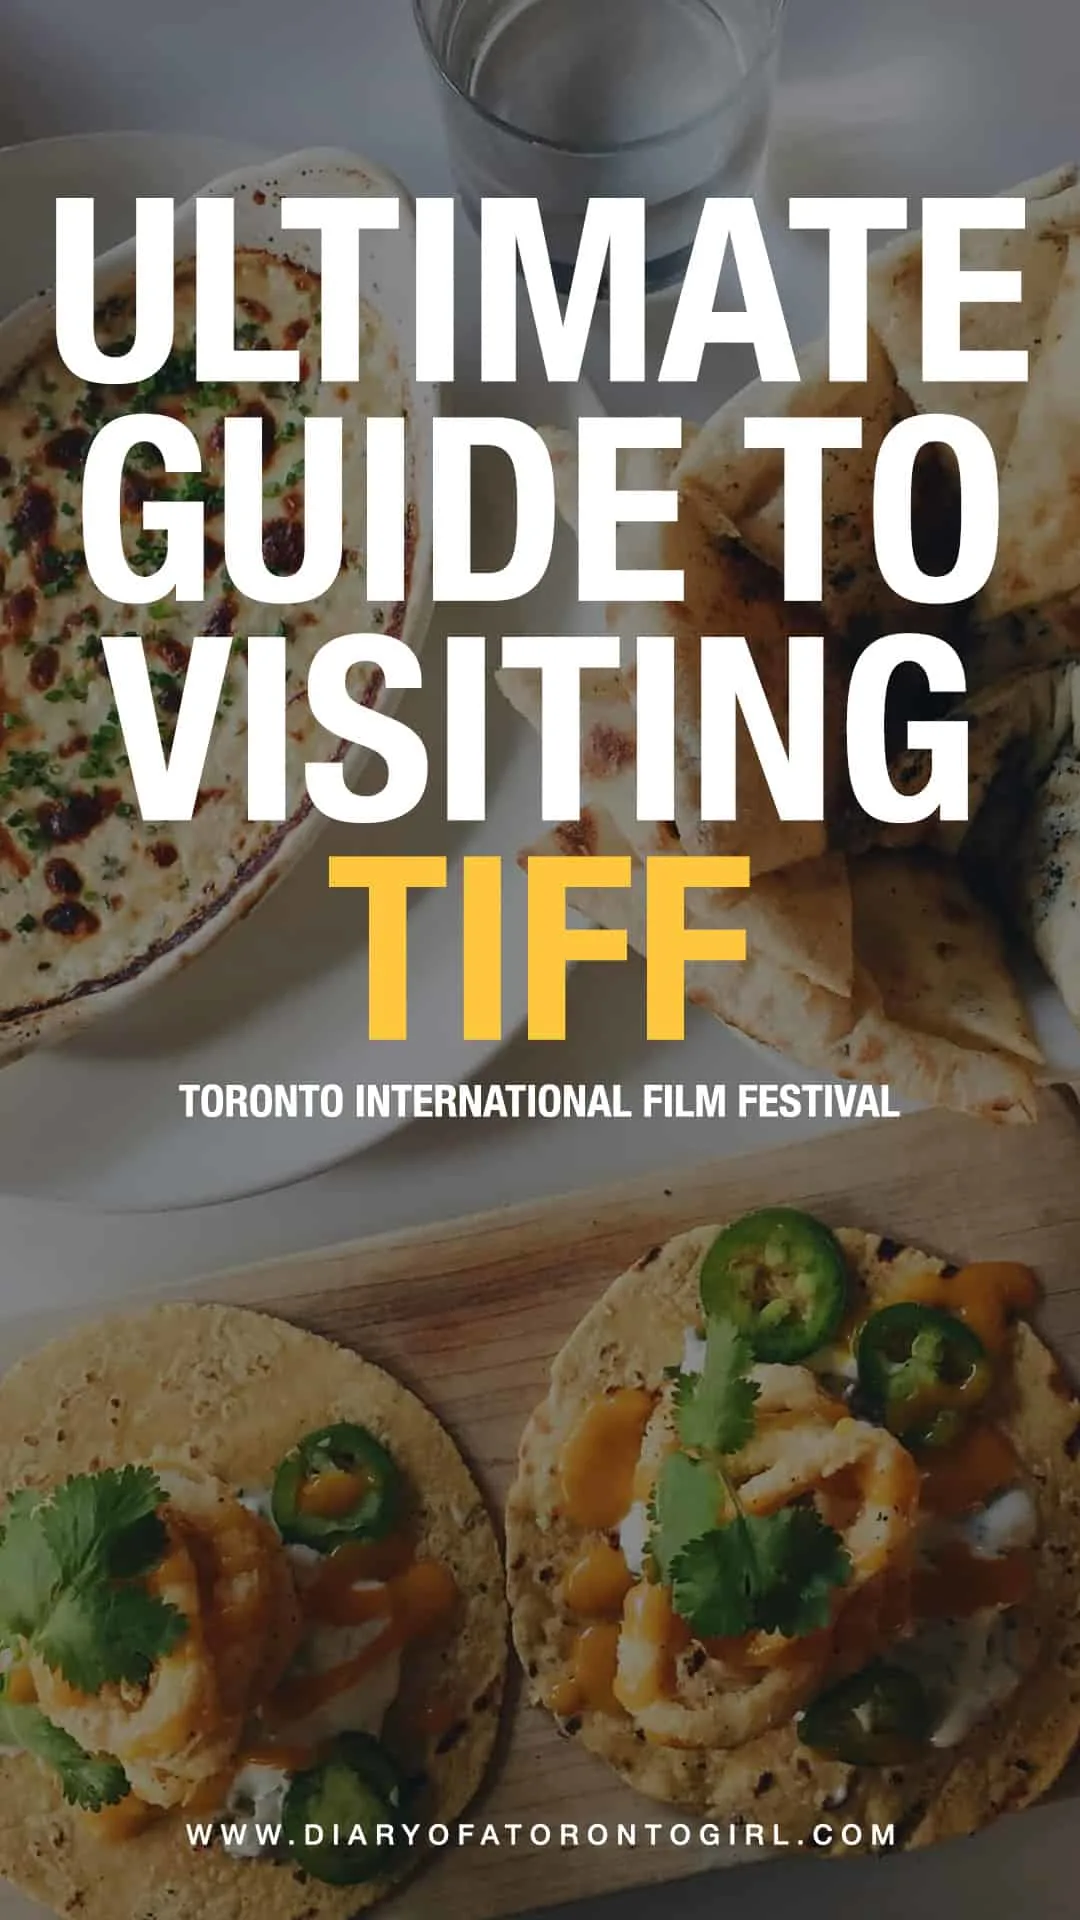 Planning a visit to the Toronto International Film Festival? Here's your ultimate guide on visiting TIFF, including what to do during the festival and where to eat around the theatres!